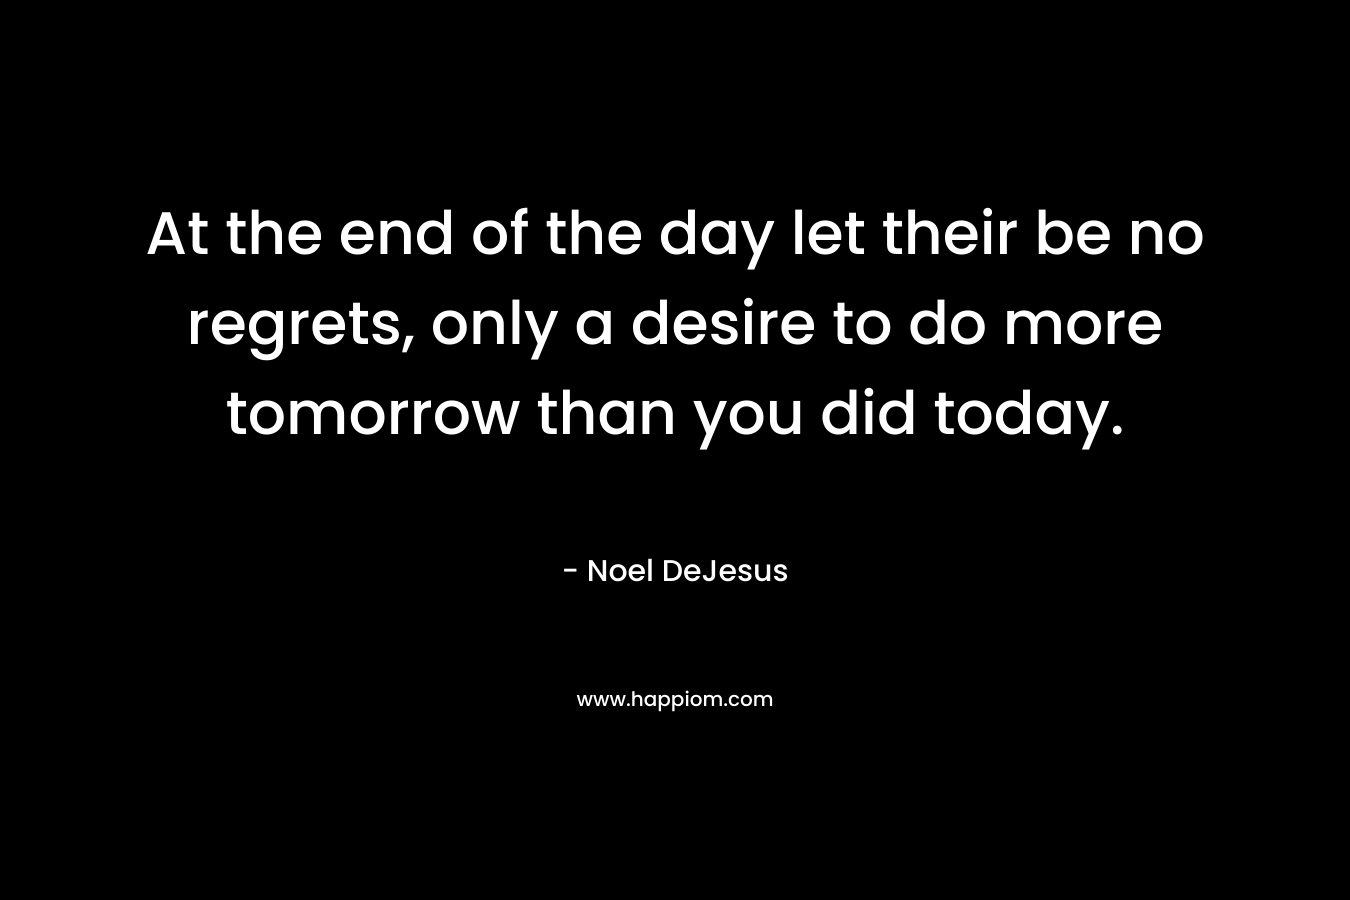 At the end of the day let their be no regrets, only a desire to do more tomorrow than you did today. – Noel DeJesus